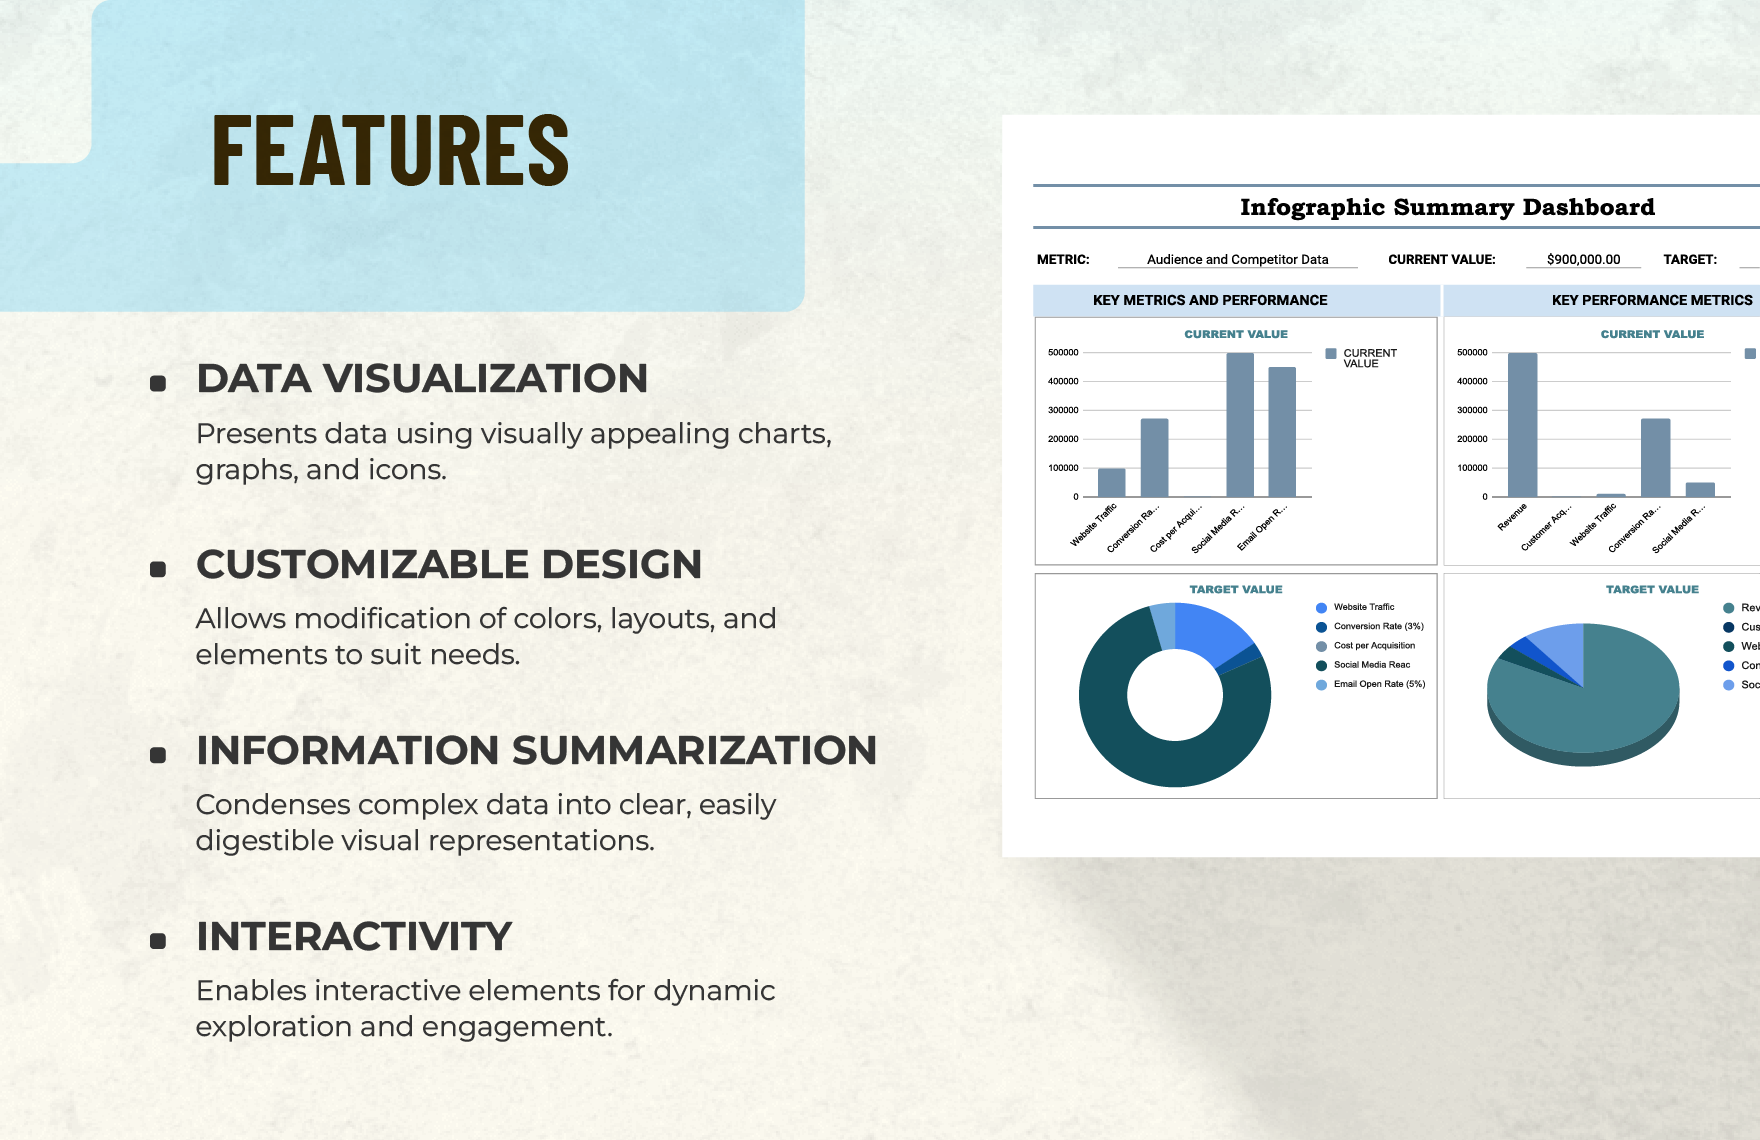 Dashboard Infographic Template